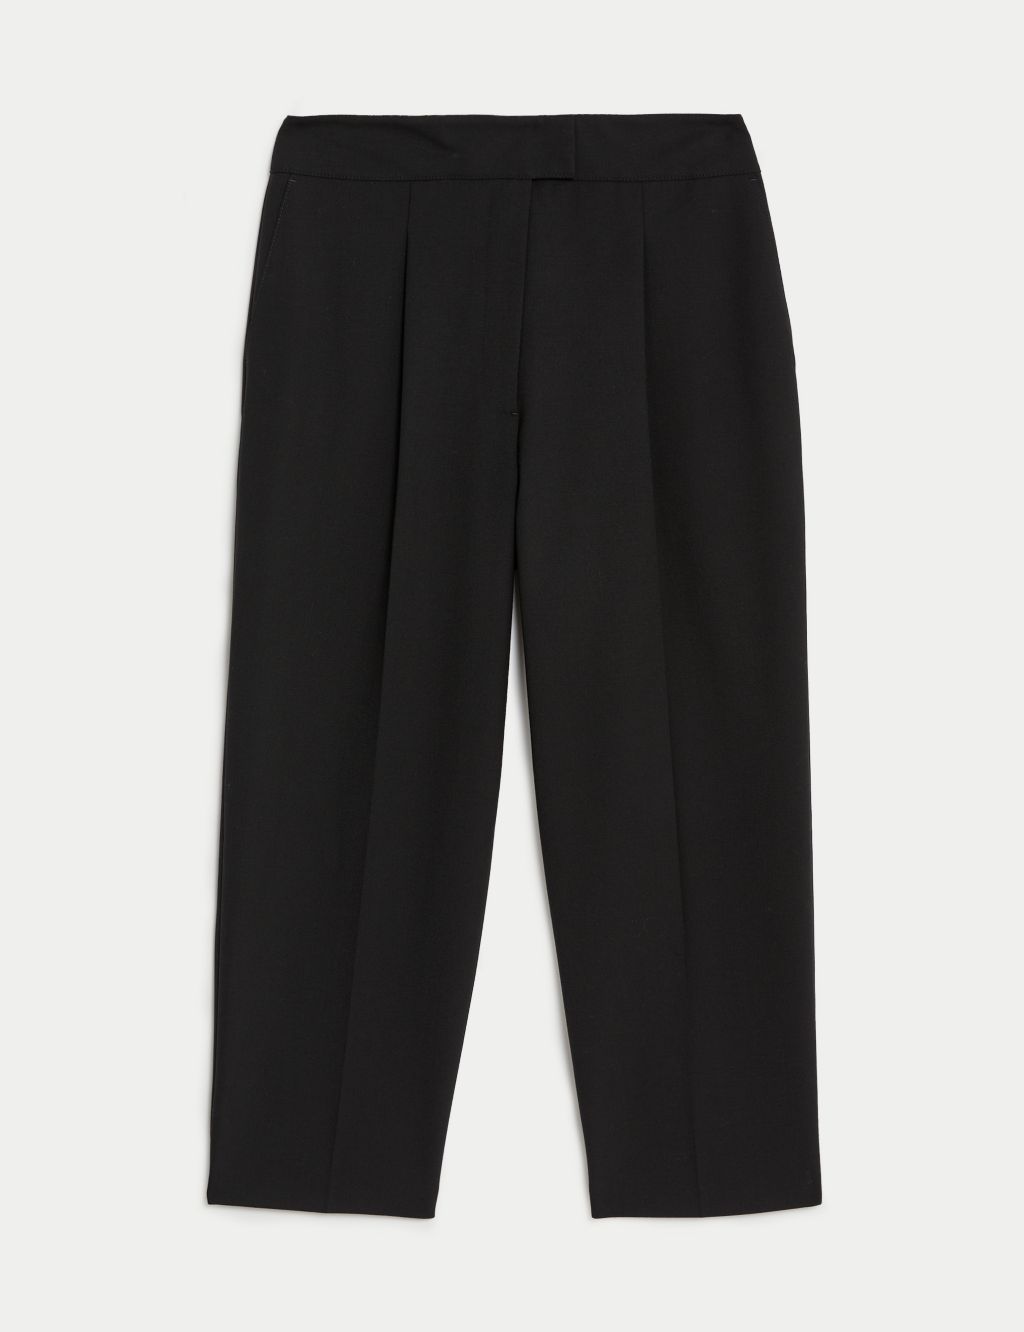 Wool Blend Tapered Ankle Grazer Trousers image 2